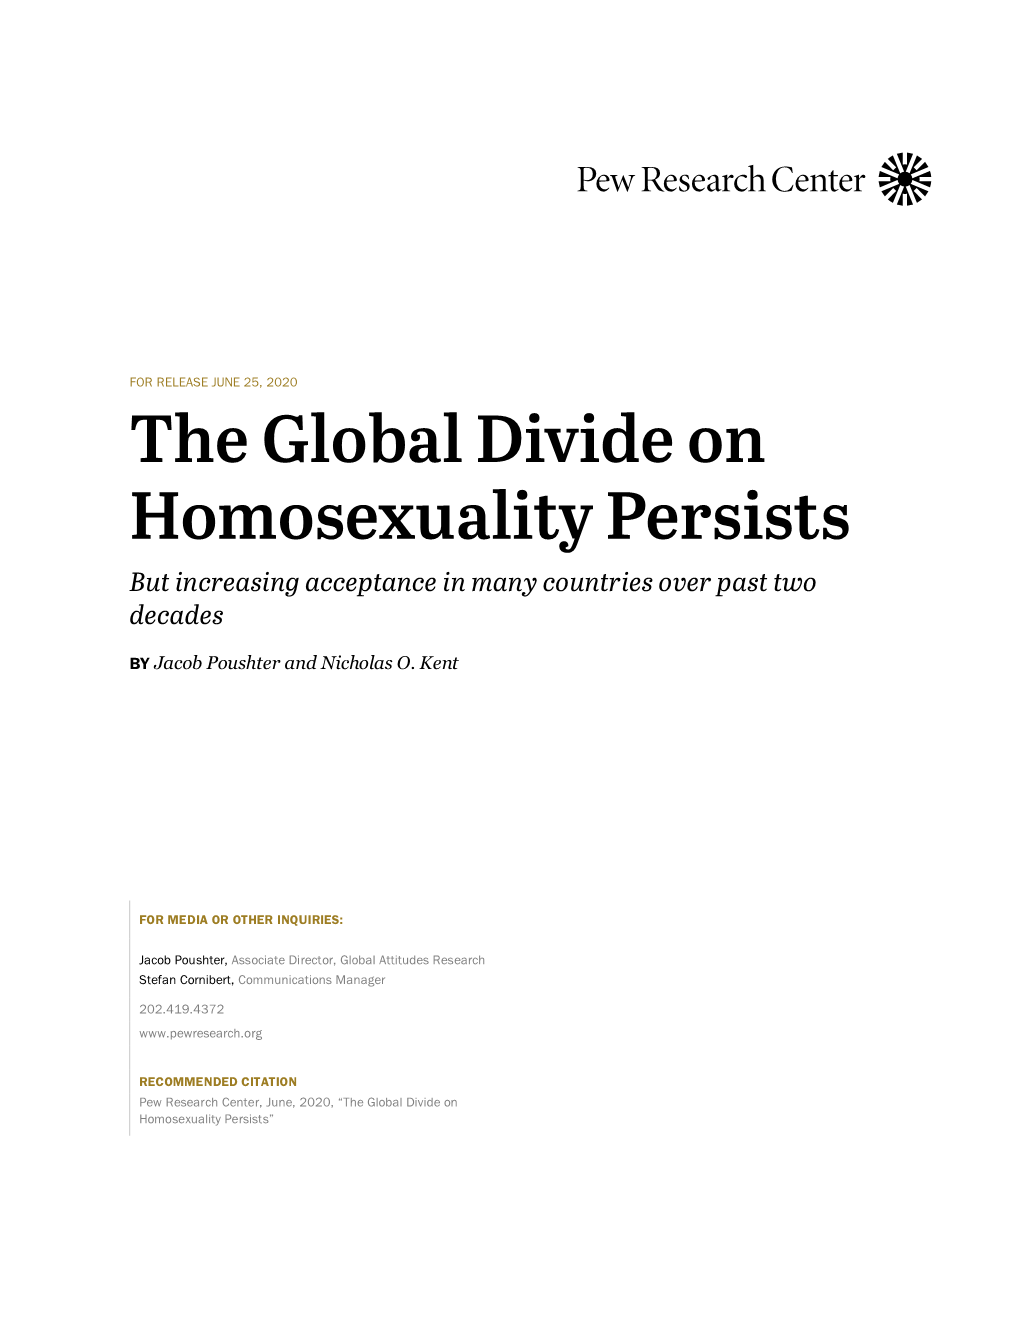 The Global Divide on Homosexuality Persists but Increasing Acceptance in Many Countries Over Past Two Decades